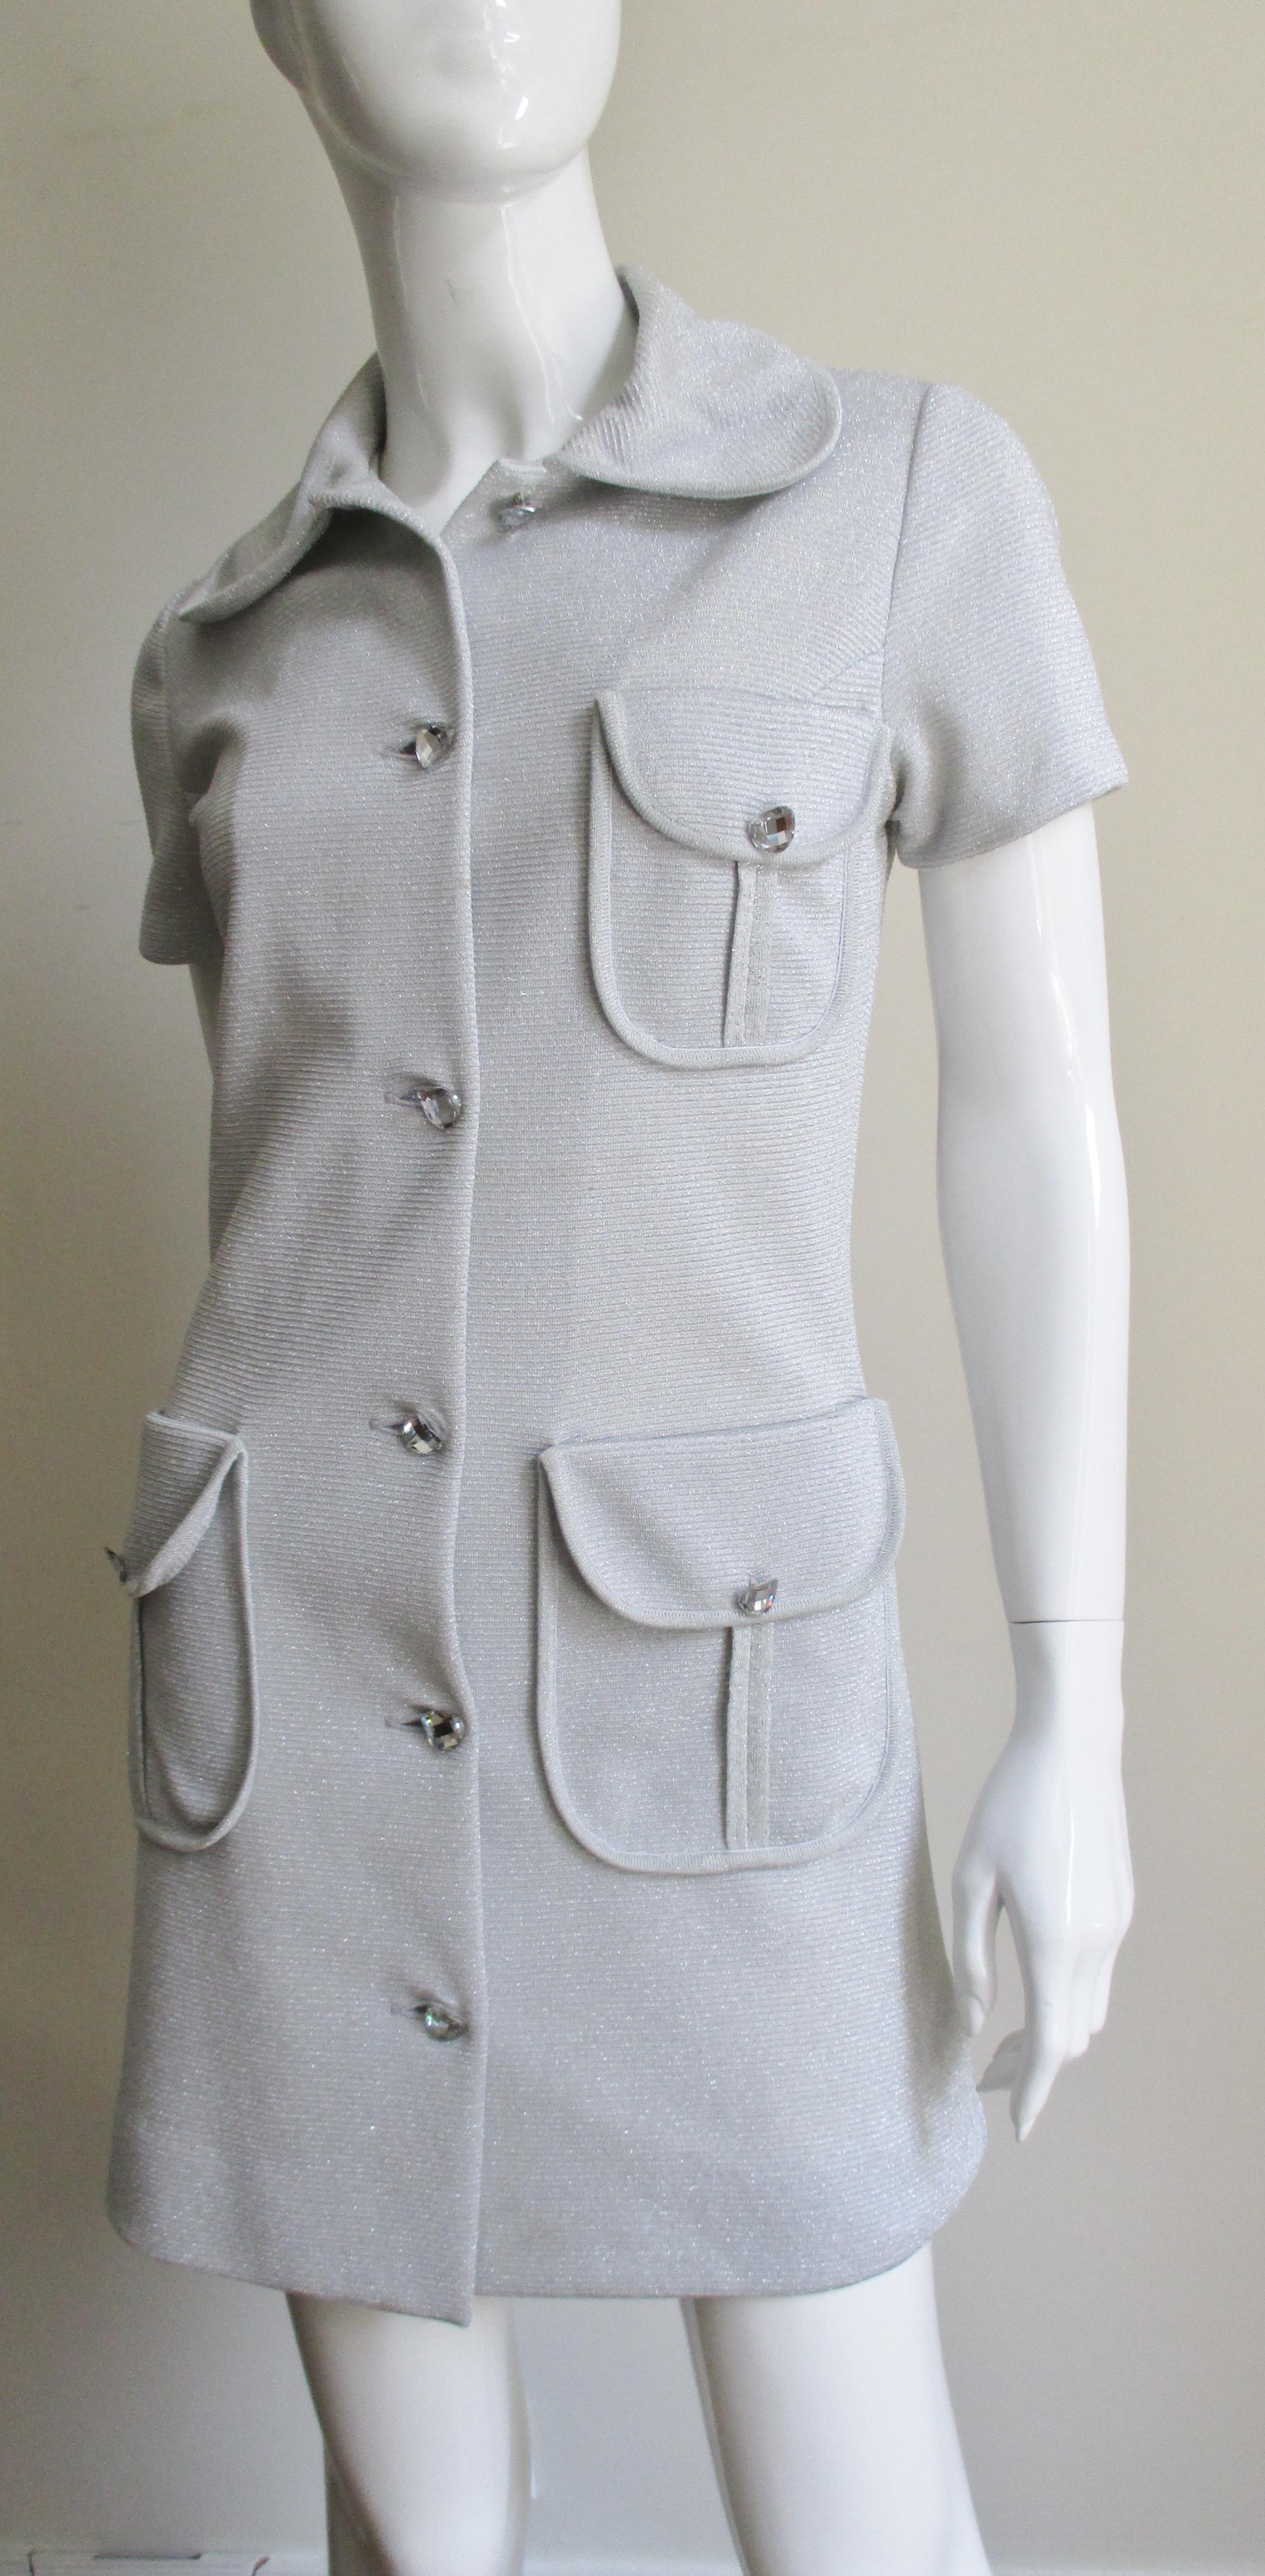 A great 1960s silver lurex mini dress from Louis Feraud. The short sleeved dress simple shirtwaist style dress has a peter pan collar, 3 button flap patch pockets and 6 center front faceted mirror glass buttons. It is unlined.
Fits Extra Small,